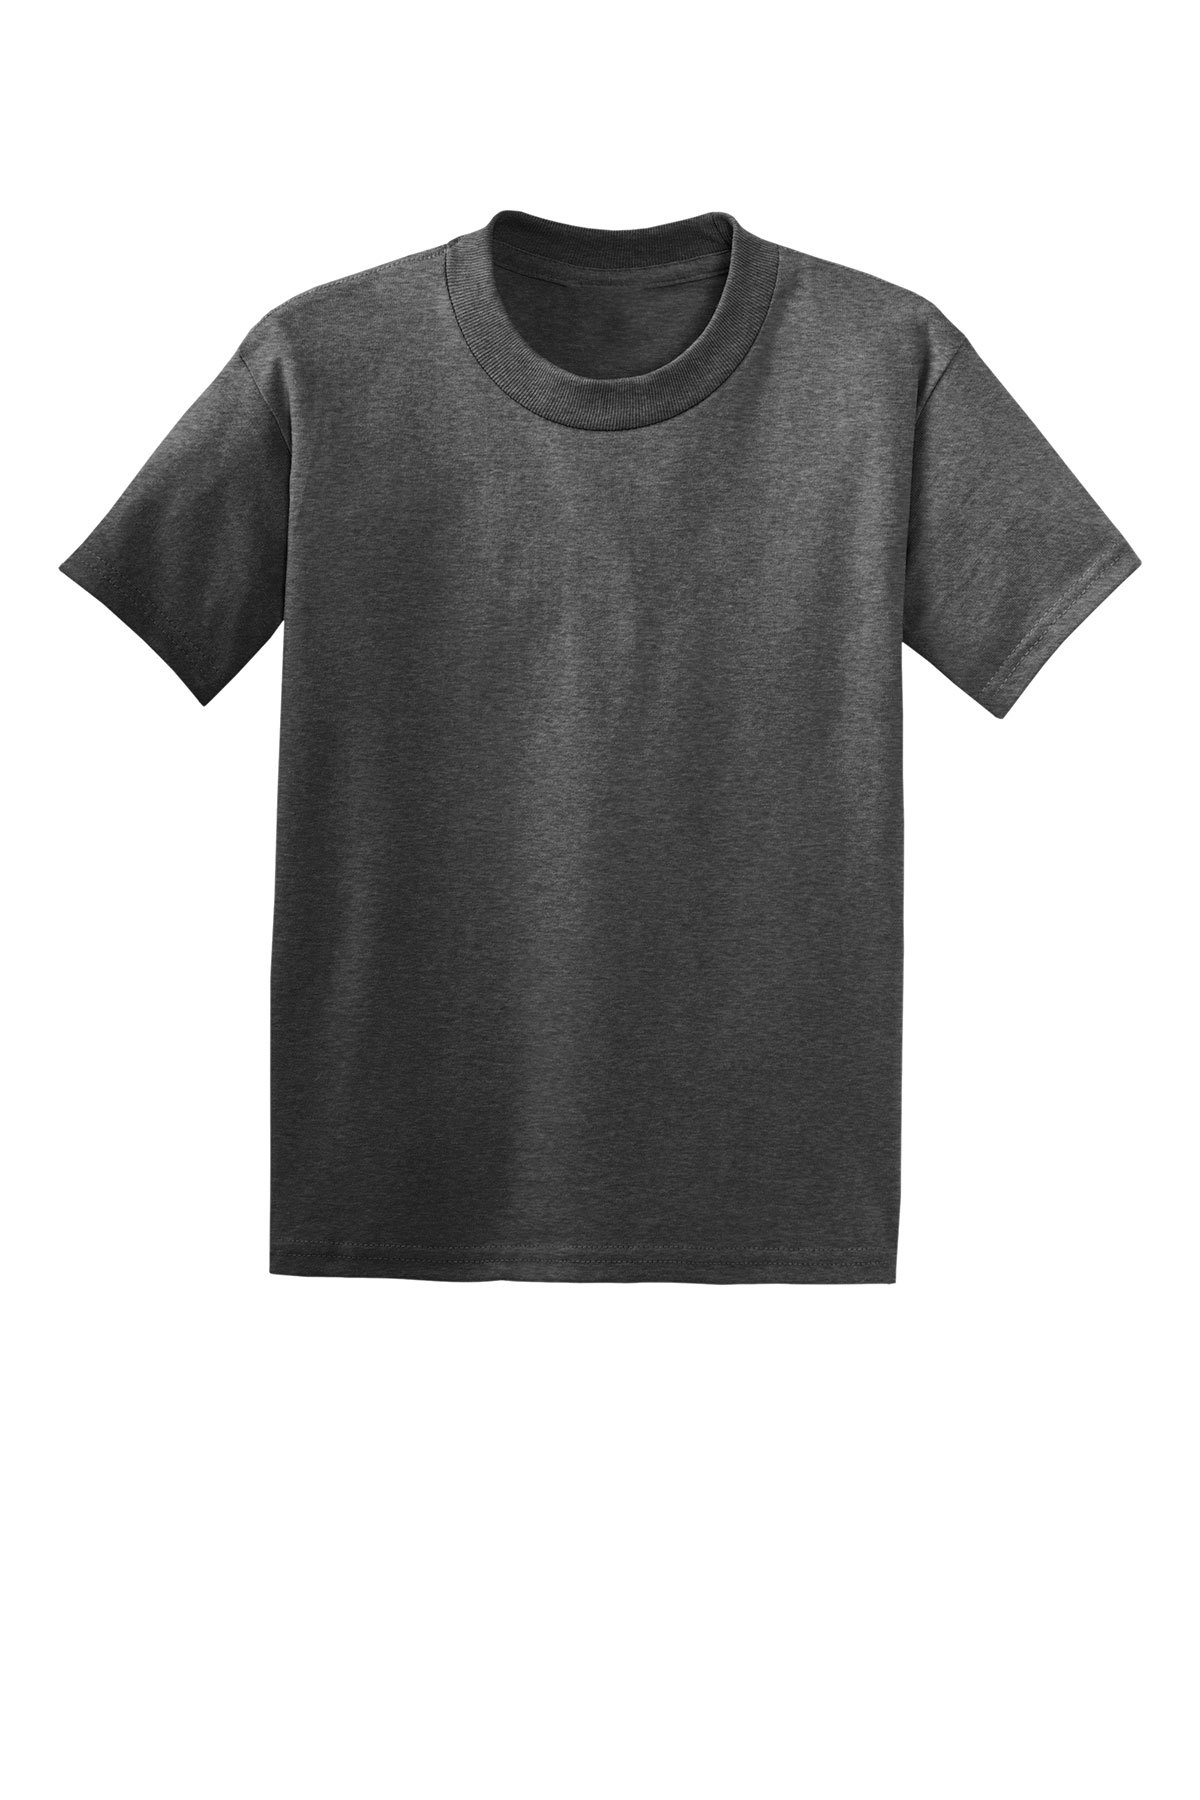 Hanes® - Youth EcoSmart 50/50 Cotton/Poly T-Shirt | Product | SanMar